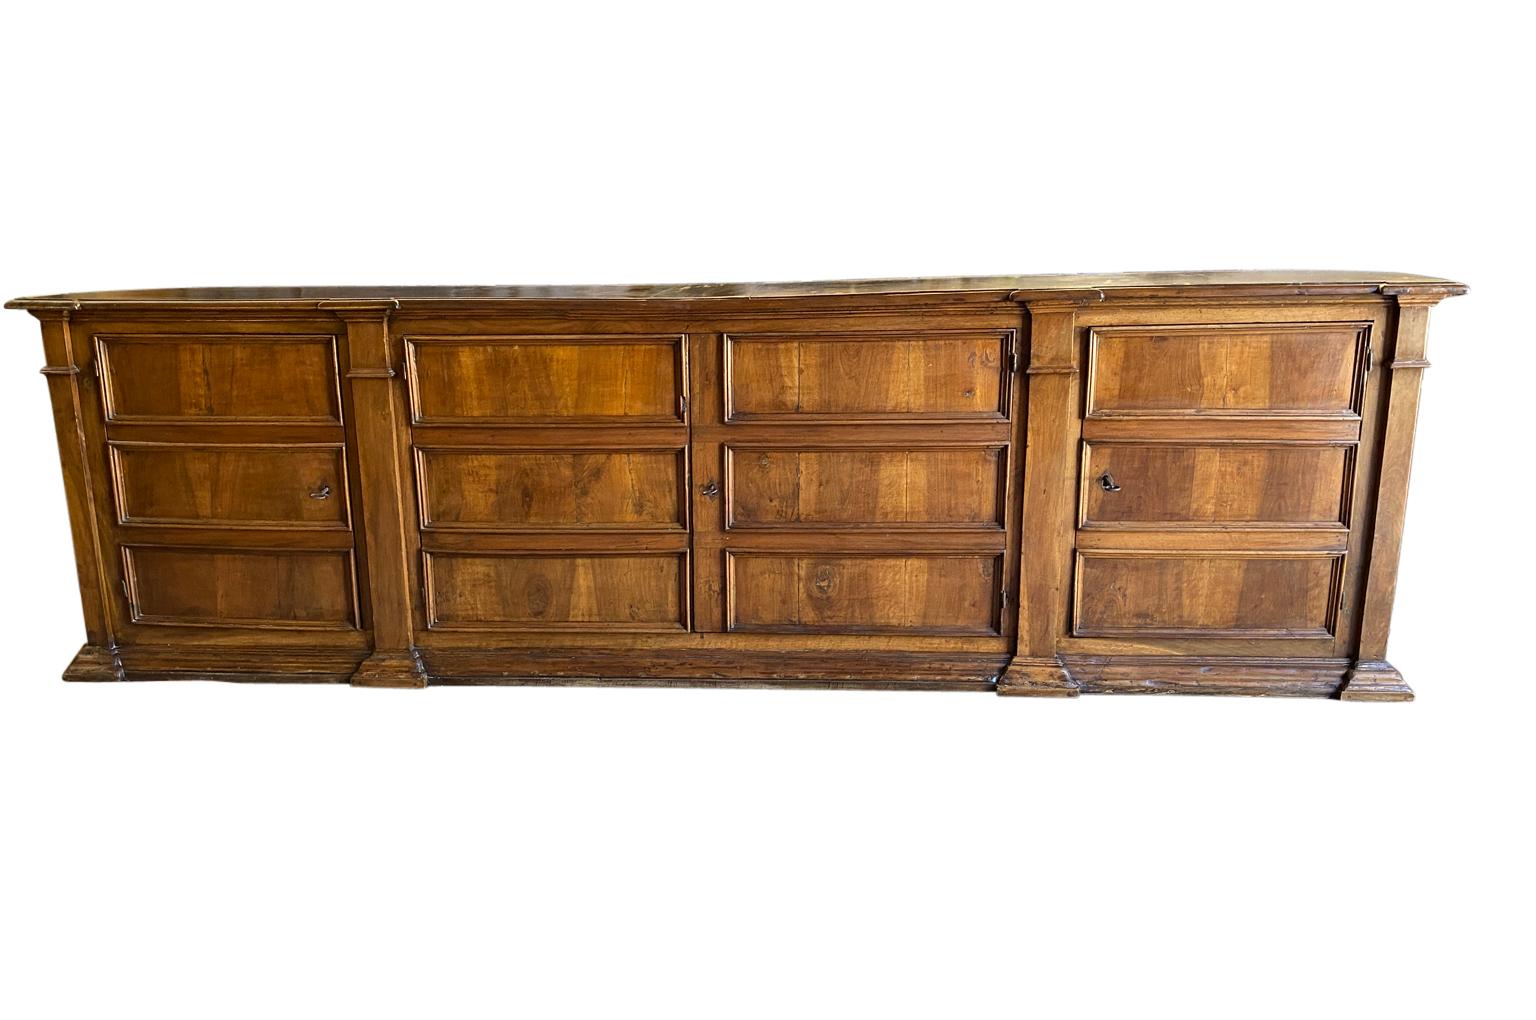 A monumental and exceptionally grand scale Italian Credenza beautifully constructed from stunning walnut. Excellent patina and graining. An absolute statement piece that will be the star of its surrounding.